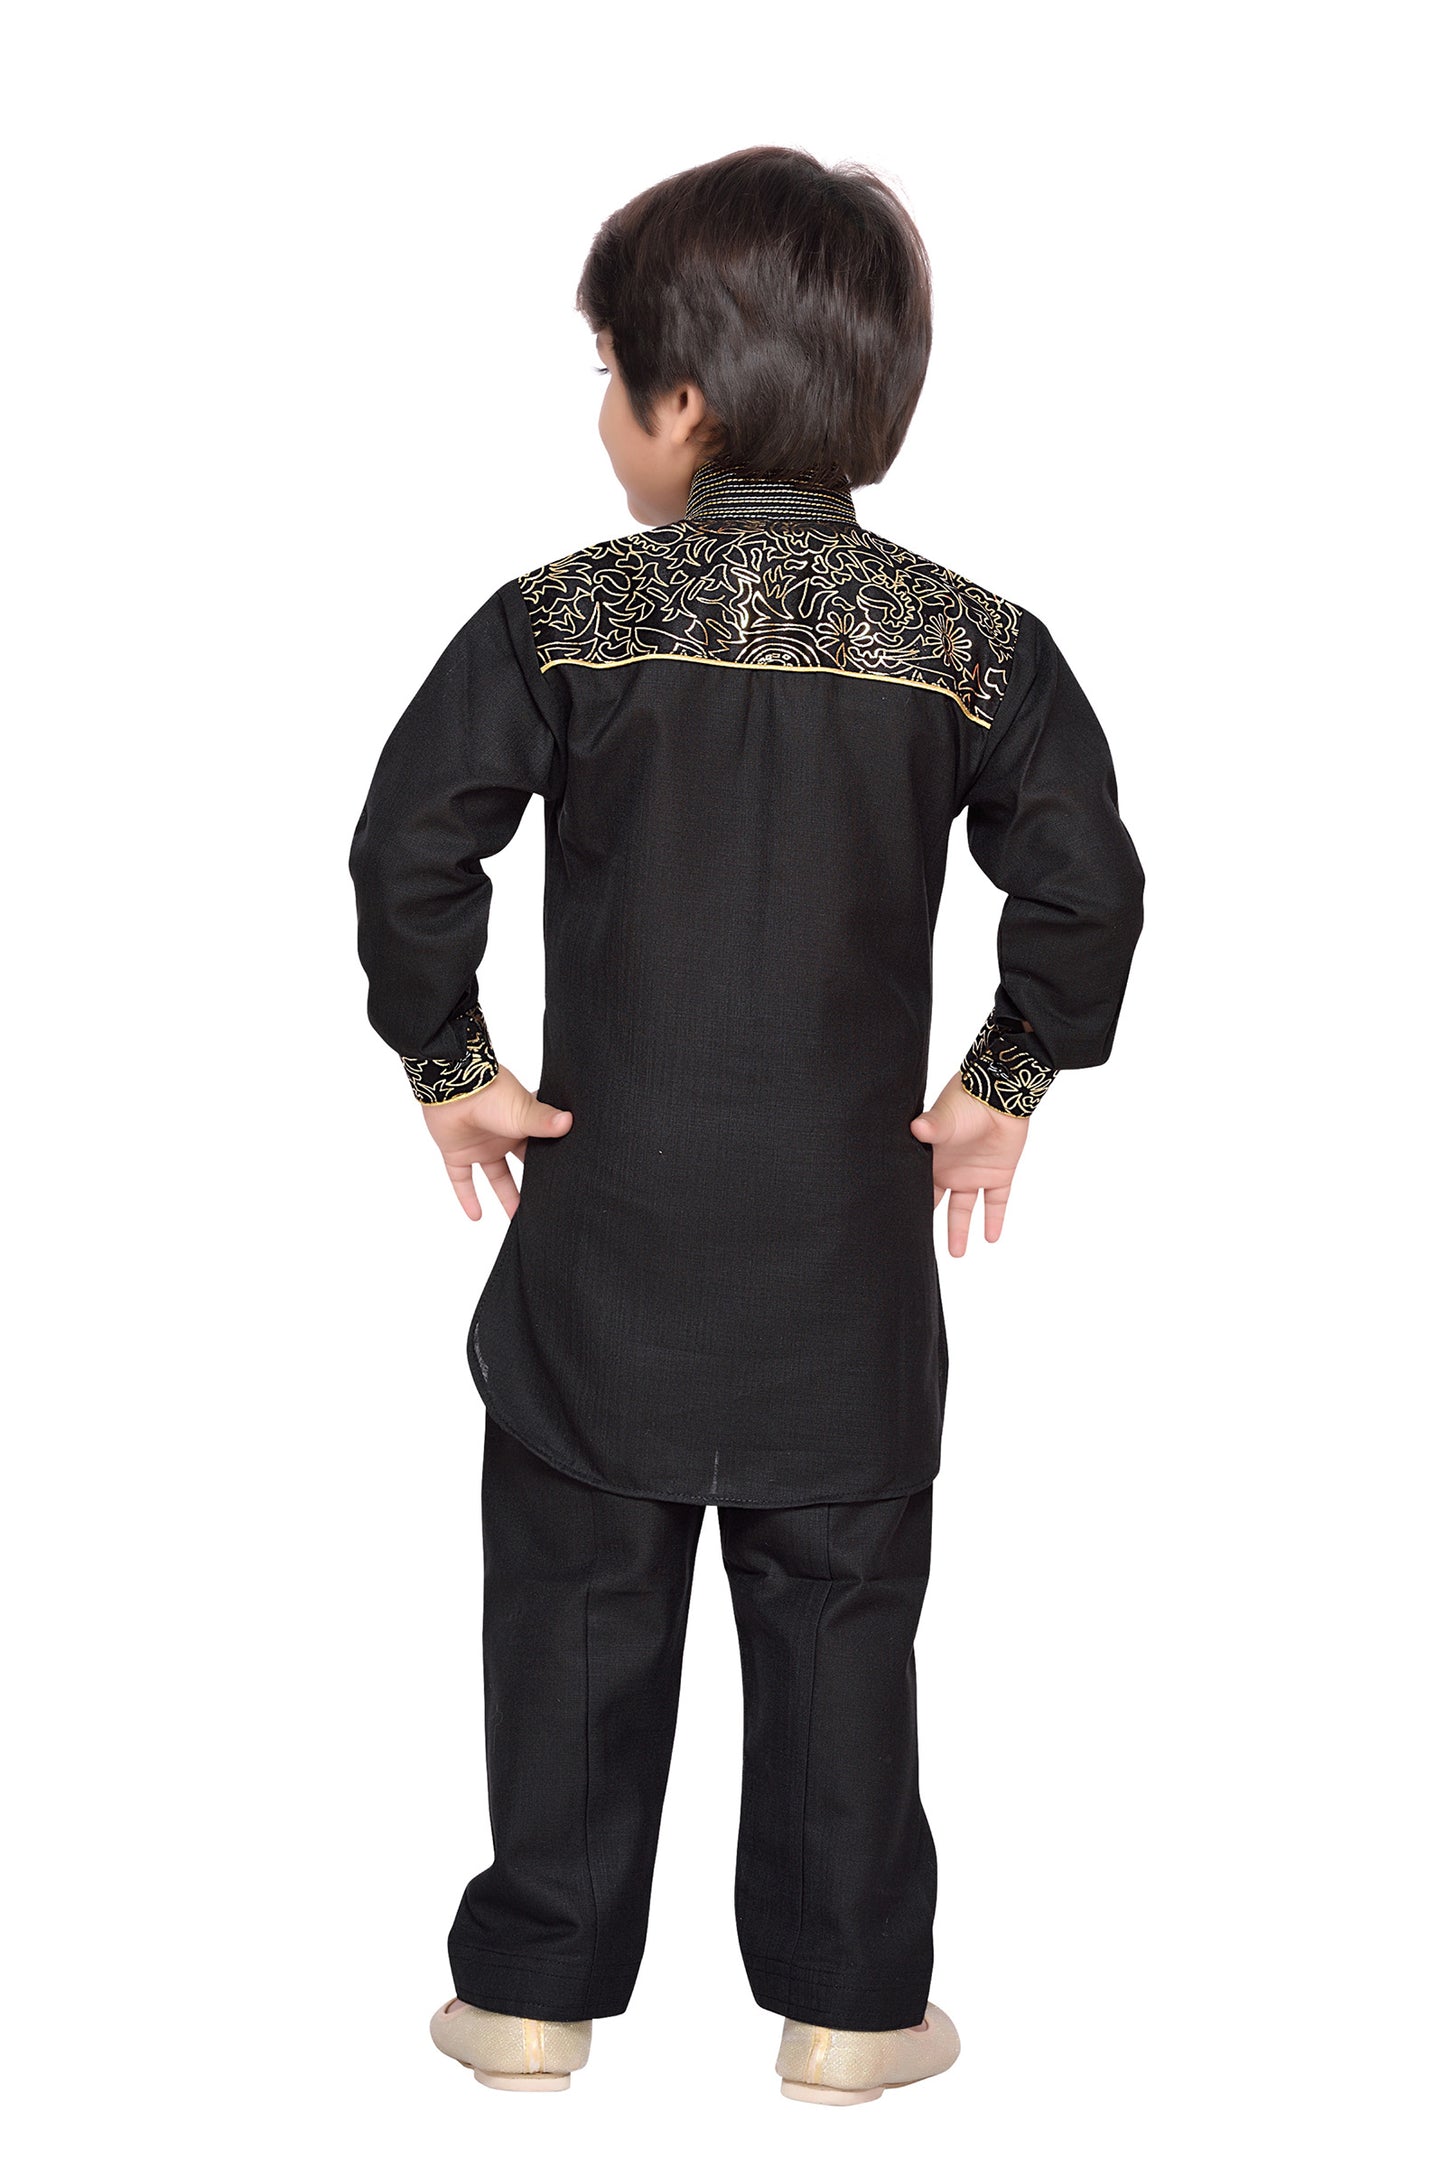 Boys Black Floral Printed with Embroidery Pathani Suit